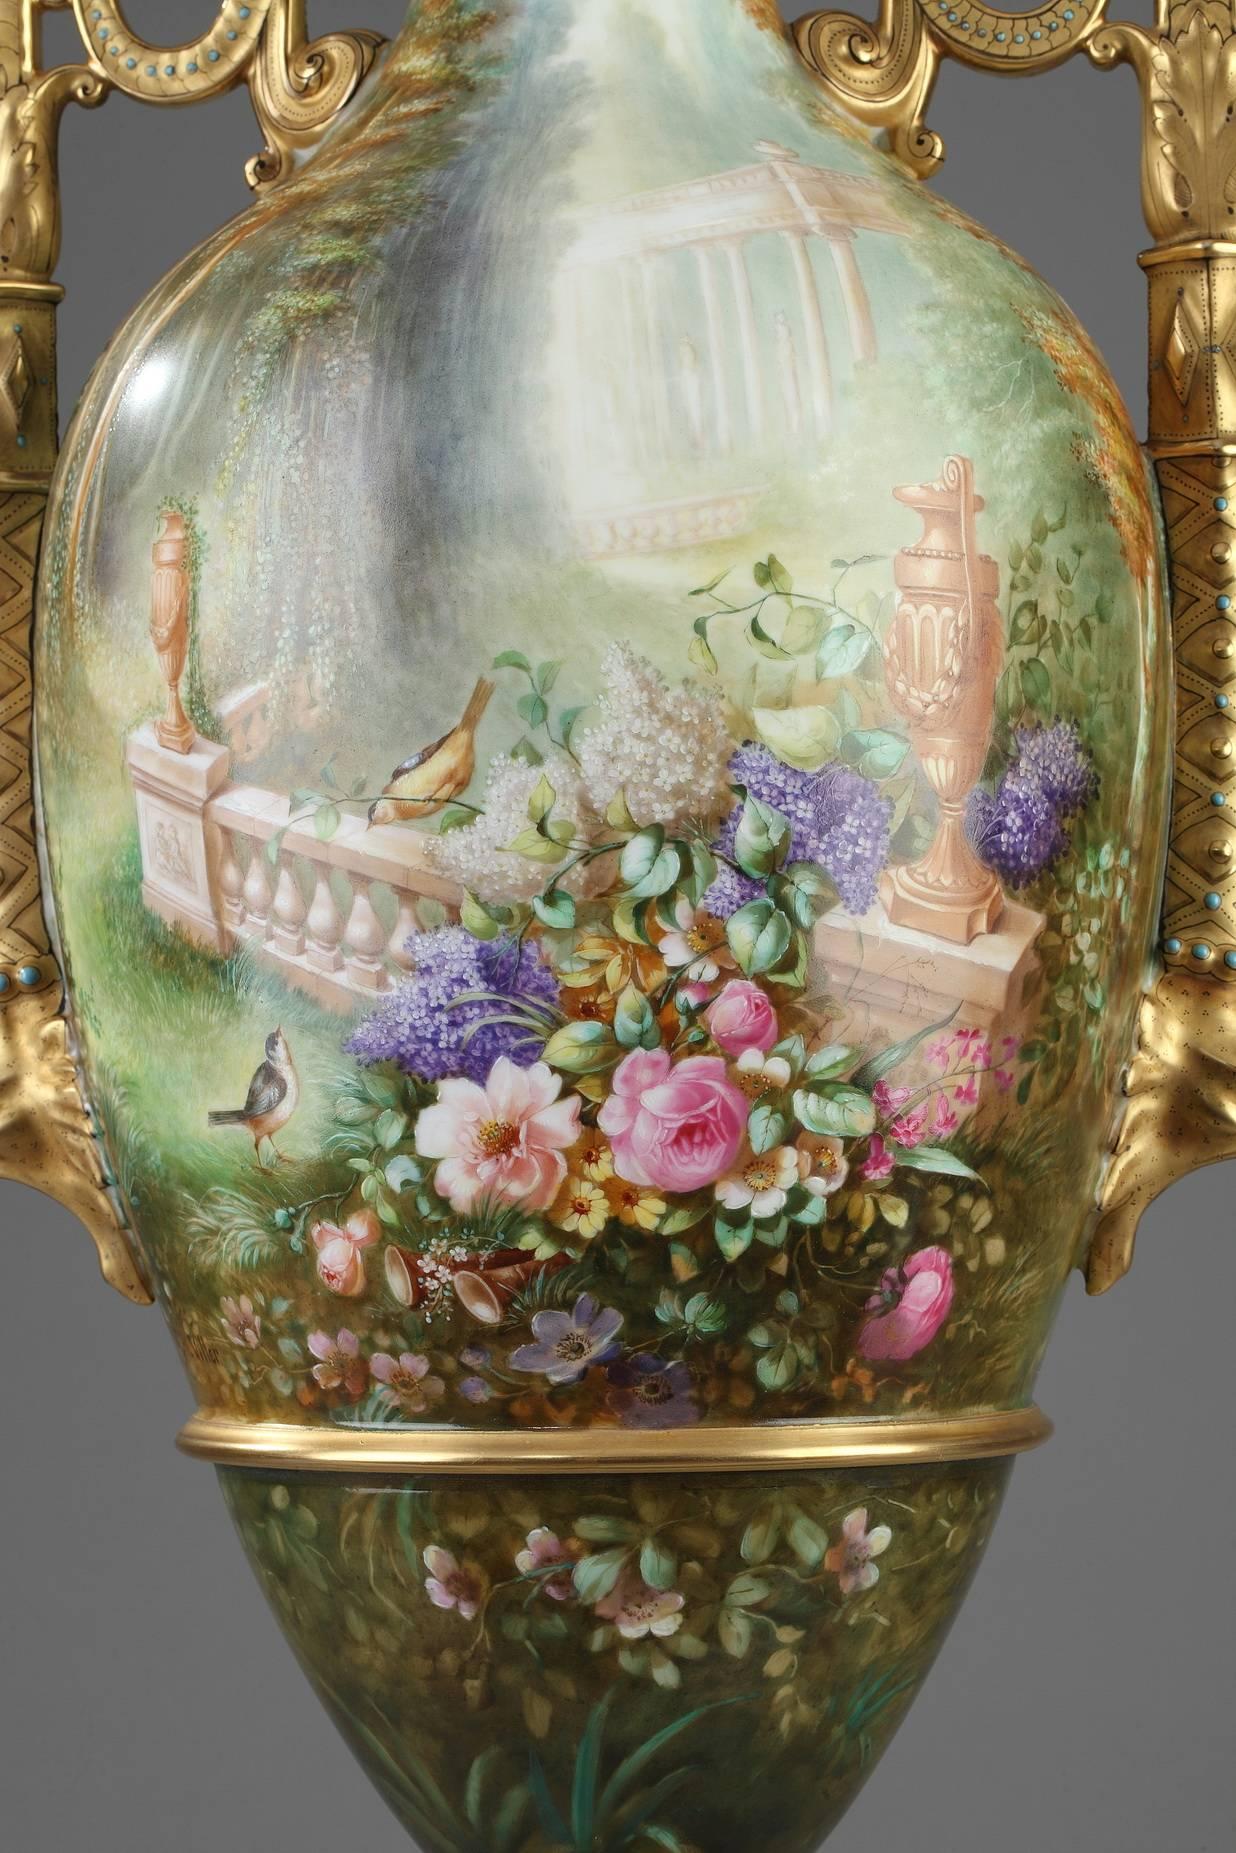 Large vase in hard Limoges porcelain with a multicolored landscape encircling the body of the neck, body and base. In one part of the scene, a pair of birds are looking at each other near a balustrade that is decorated with vases and partially